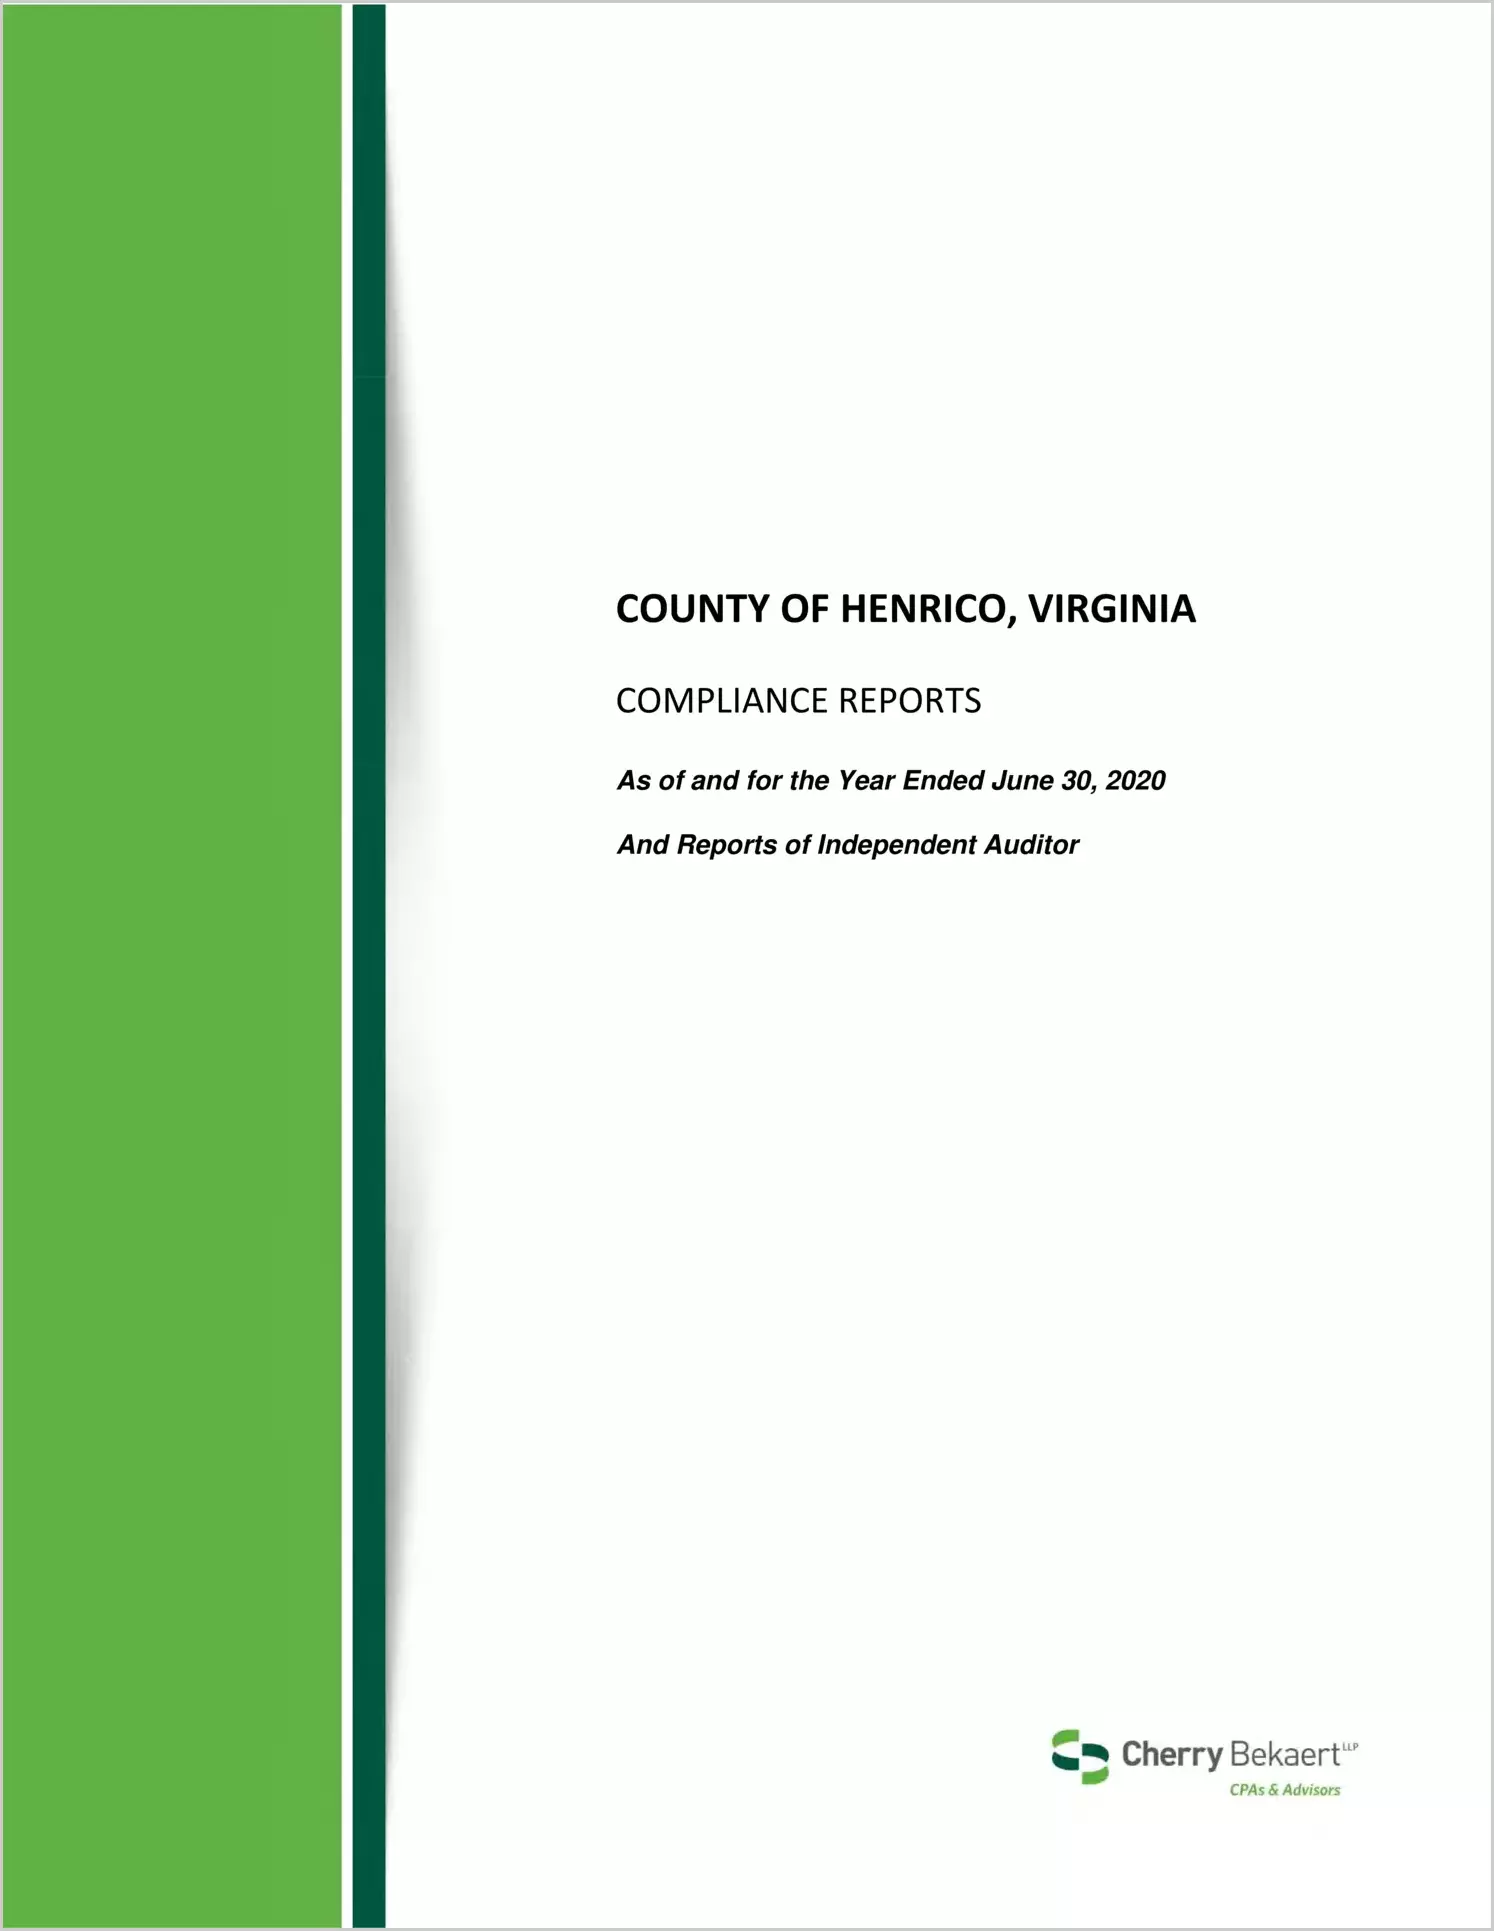 2020 Internal Control and Compliance Report for County of Henrico